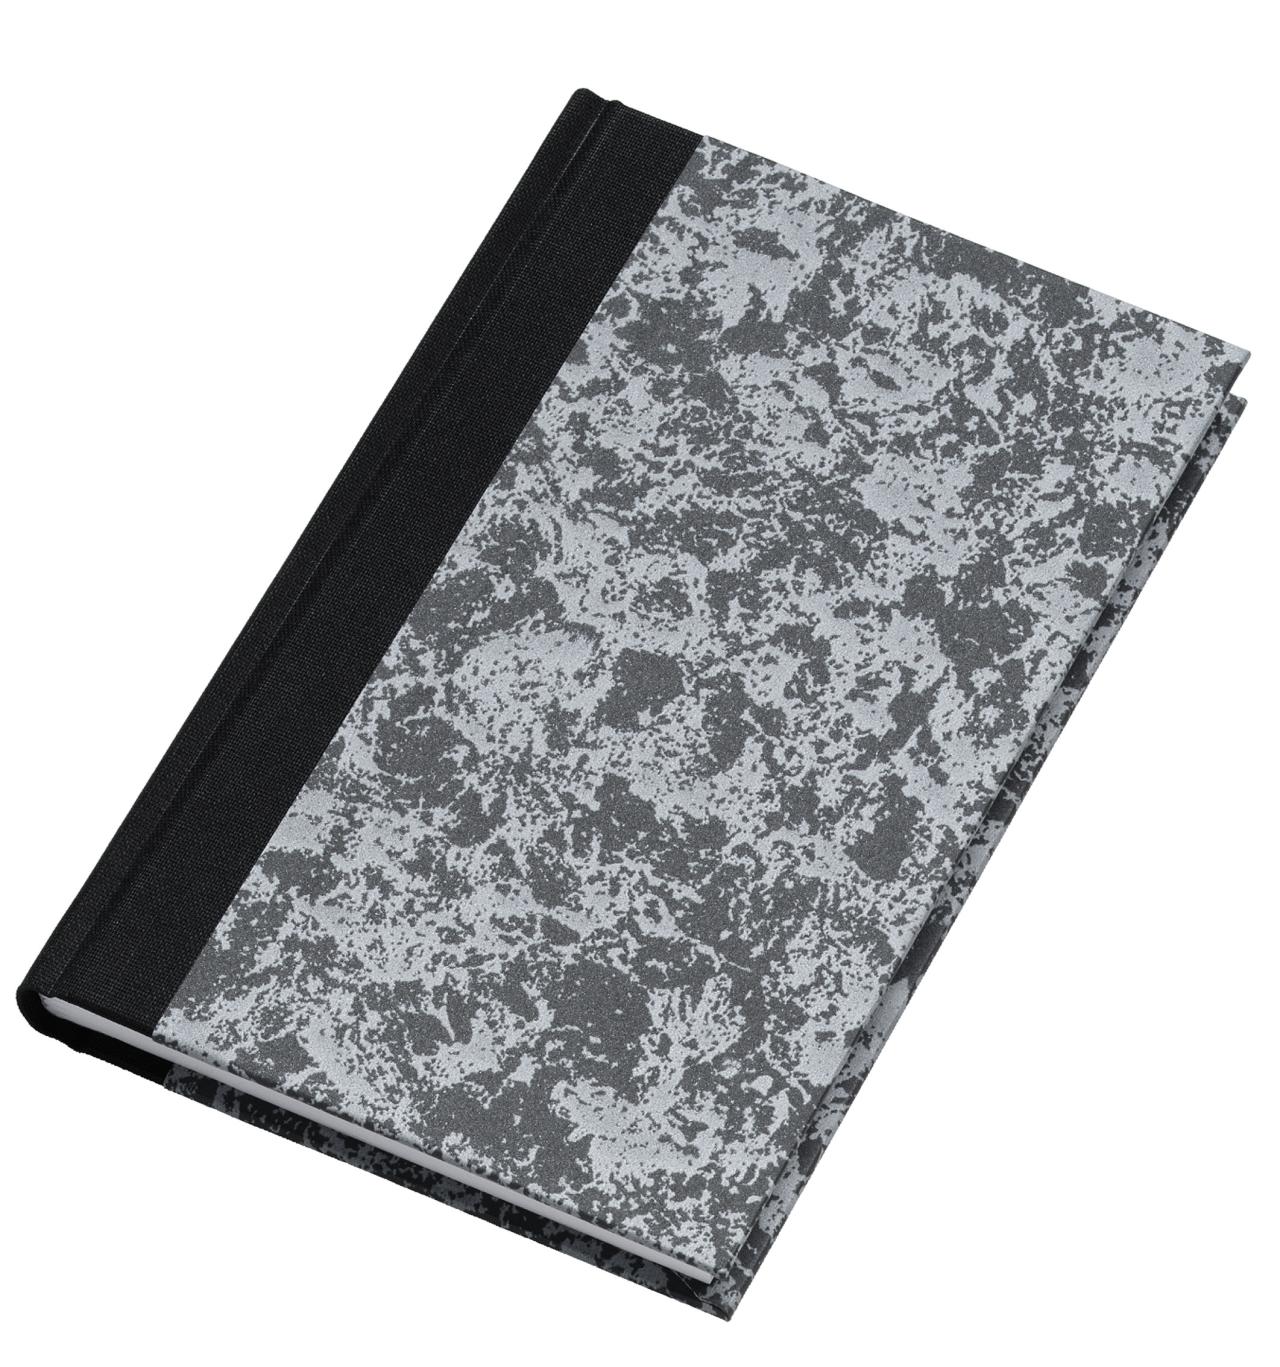 Atlanta Excellent Notebook, sewn 210 x 165 mm, 96 pages